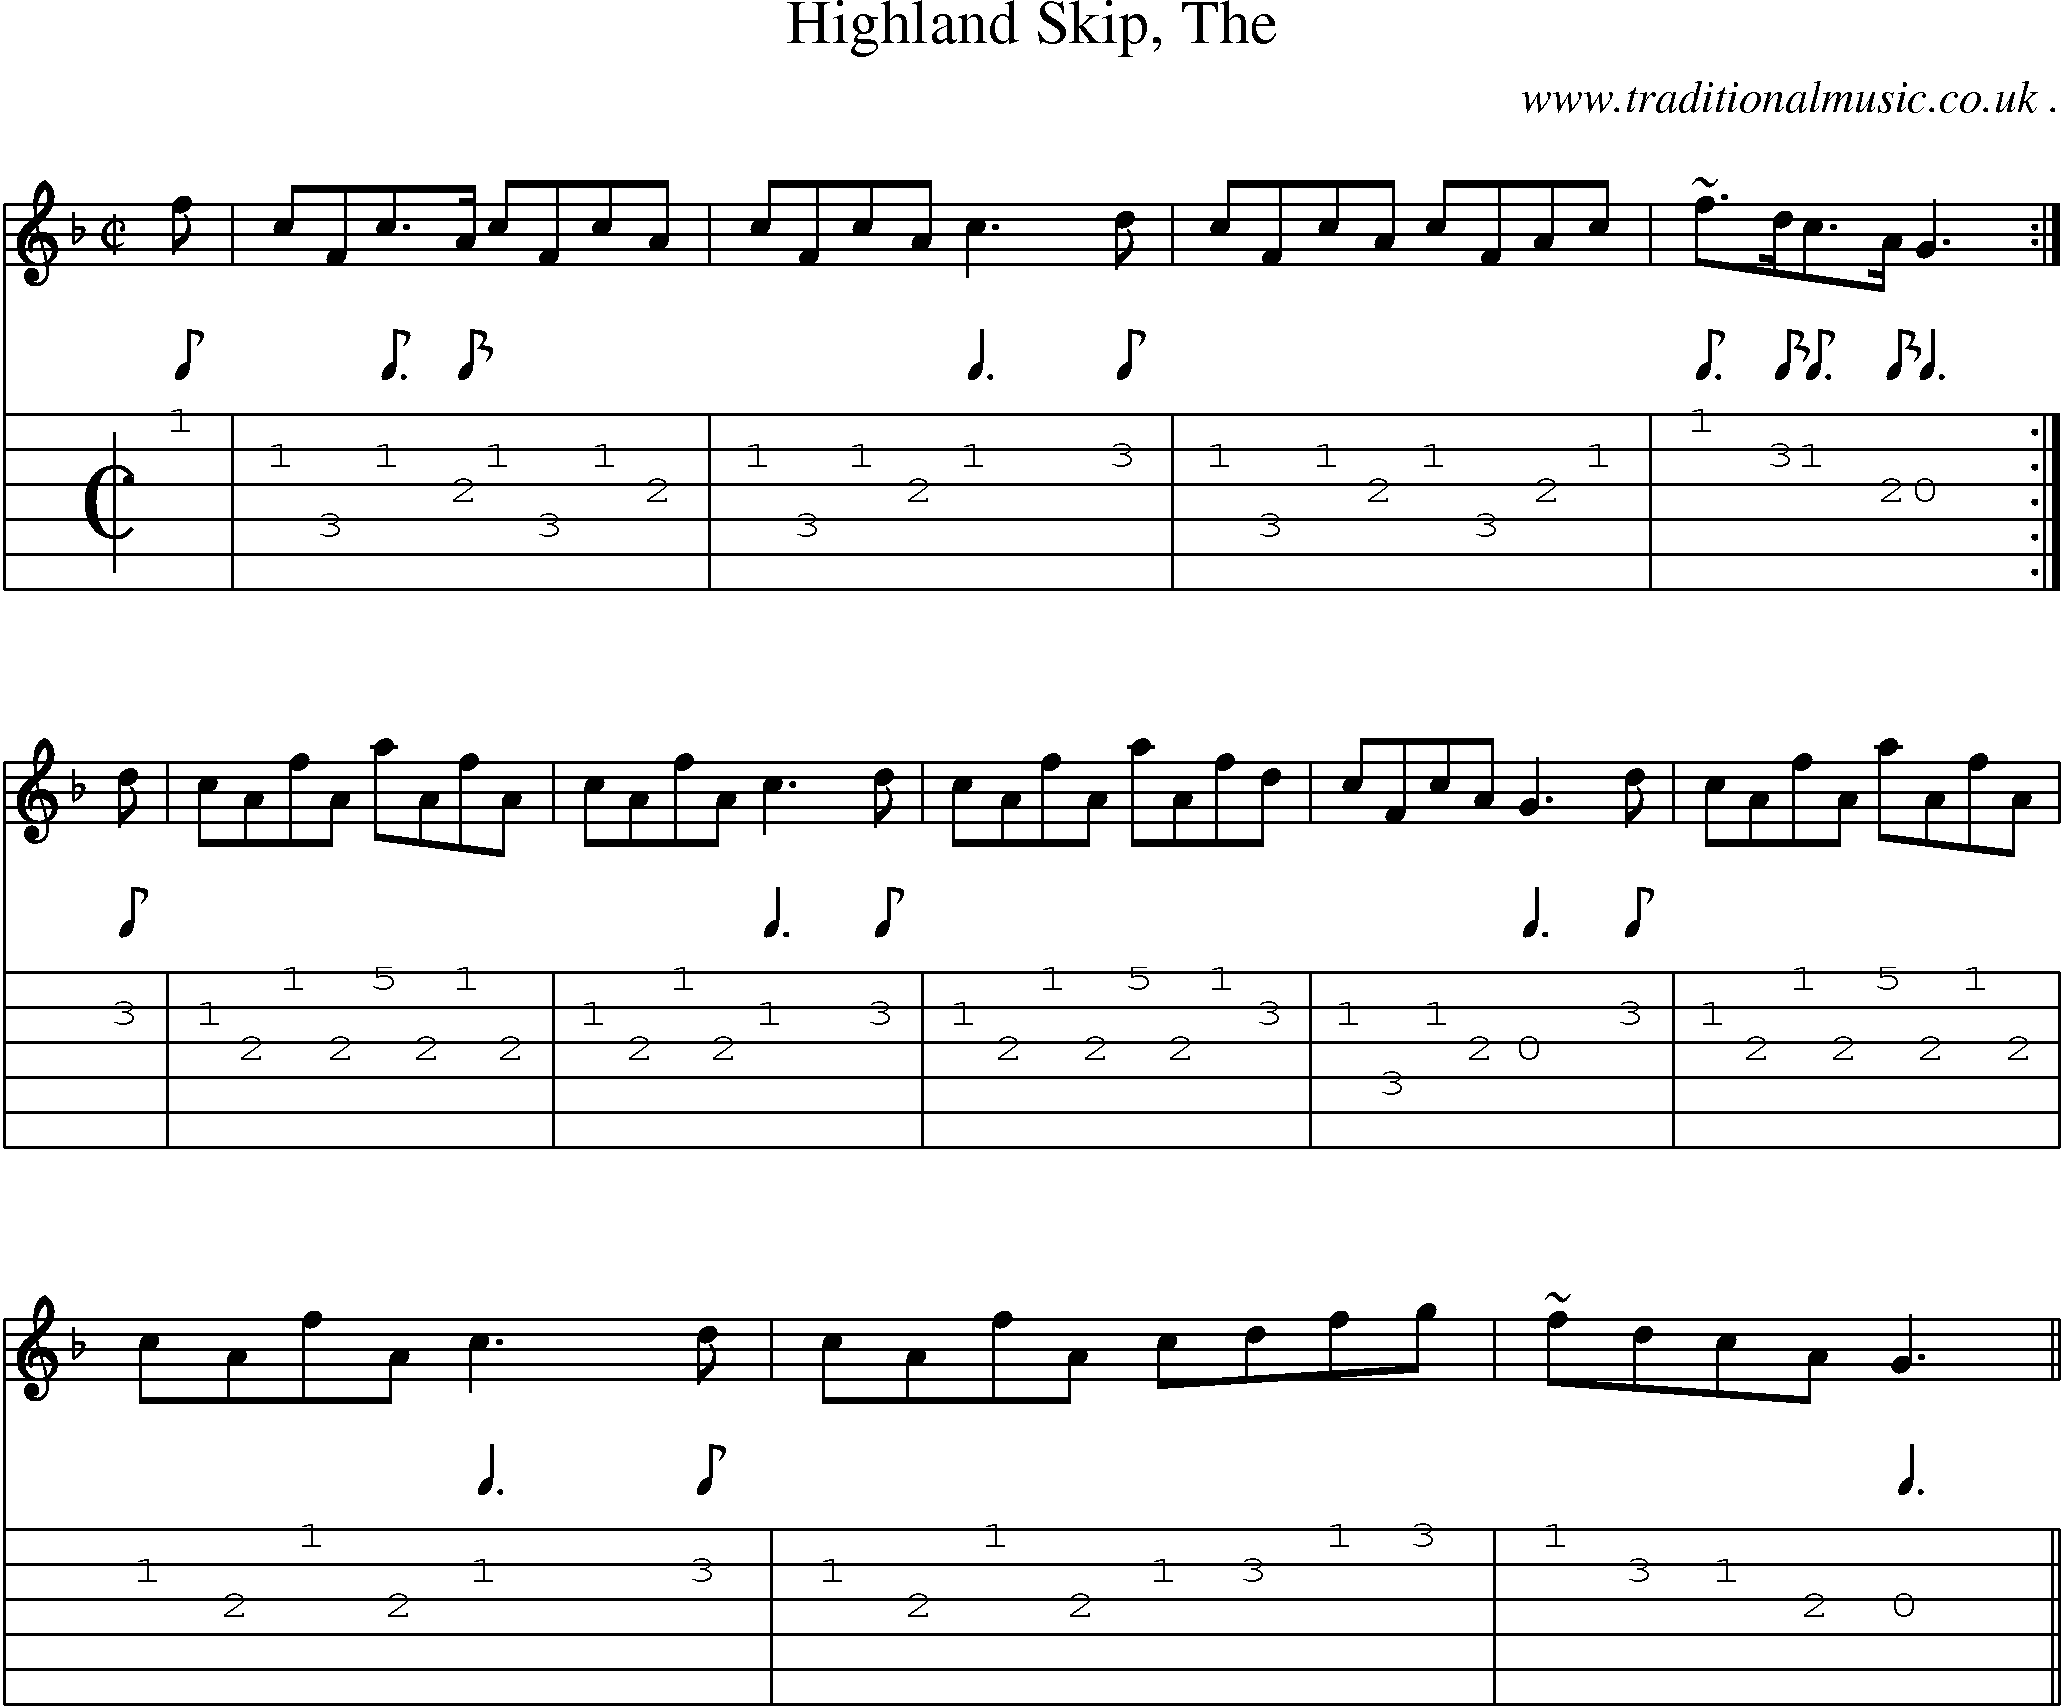 Sheet-music  score, Chords and Guitar Tabs for Highland Skip The